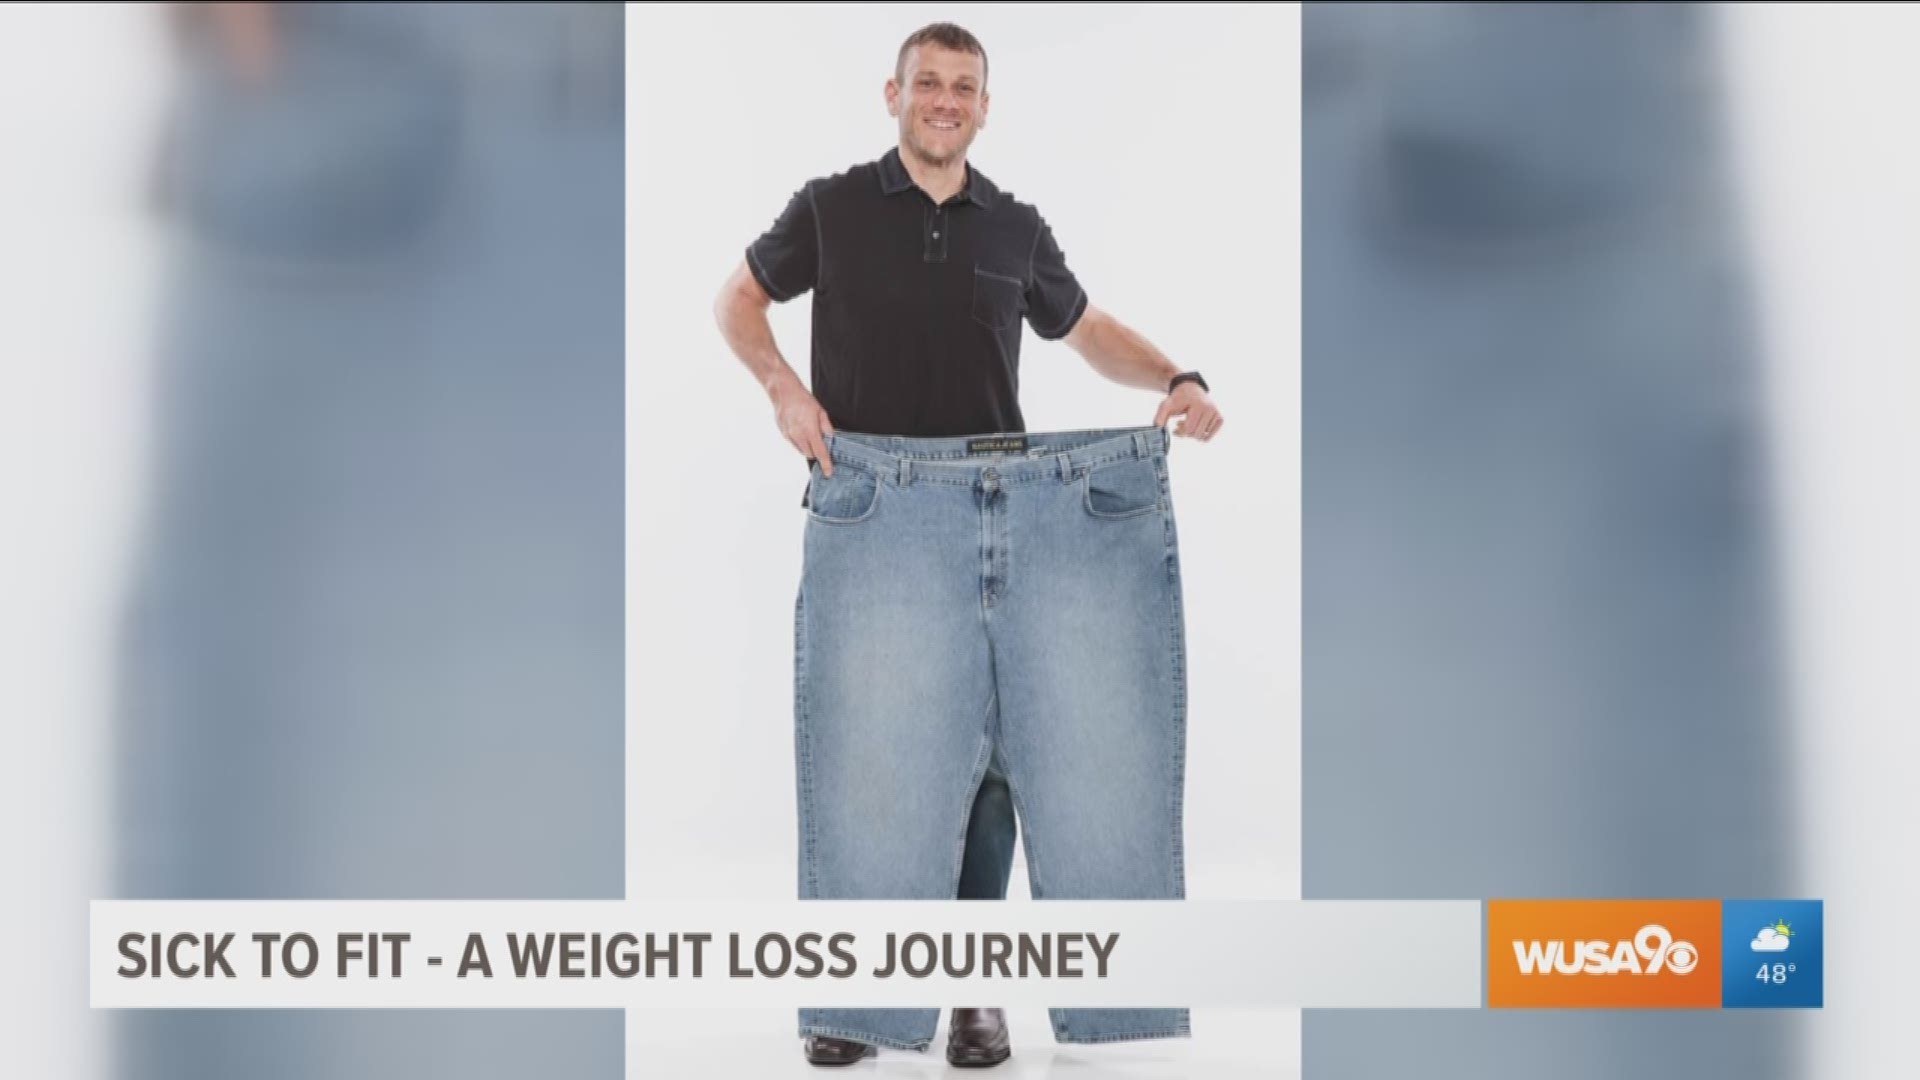 Co-Founder of WellStart Health and author of "Sick to Fit" Josh LaJaunie takes us through his journey from weighing over 400 pounds to being a weight loss sensation.